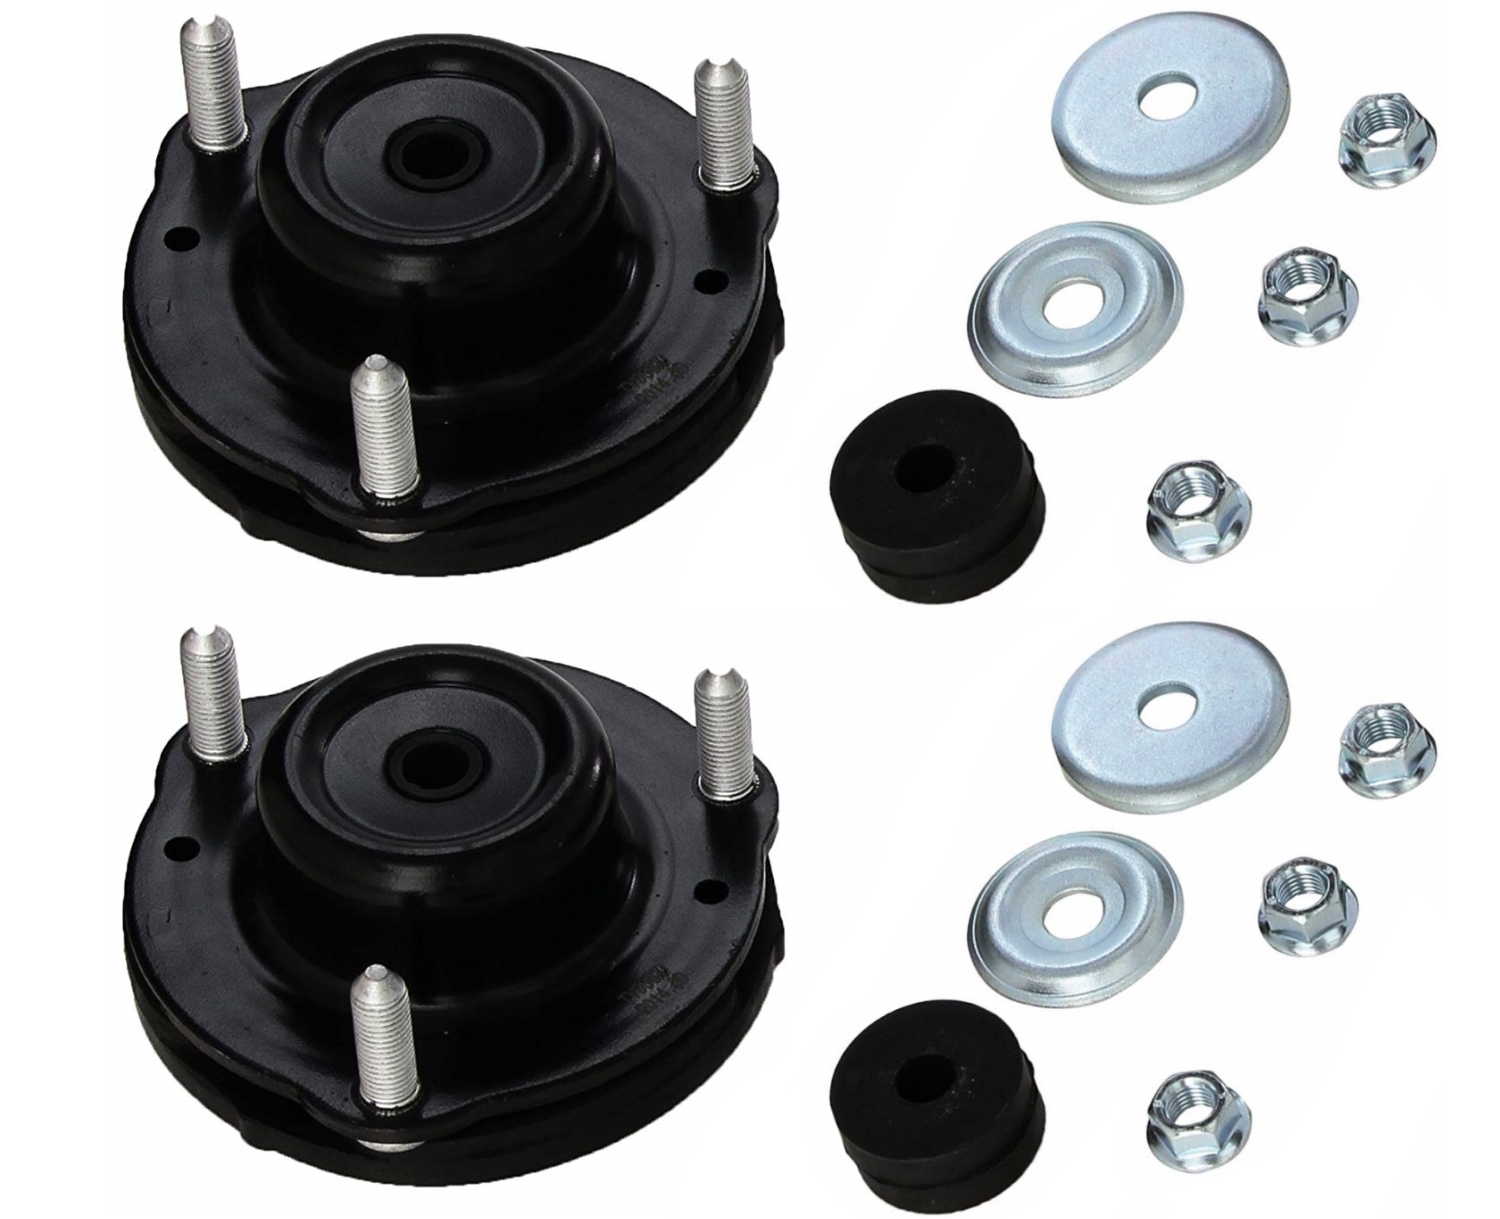 904900 Monroe Front Strut Mount Nuts for Chevy Colorado Toyota Tacoma 4Runner